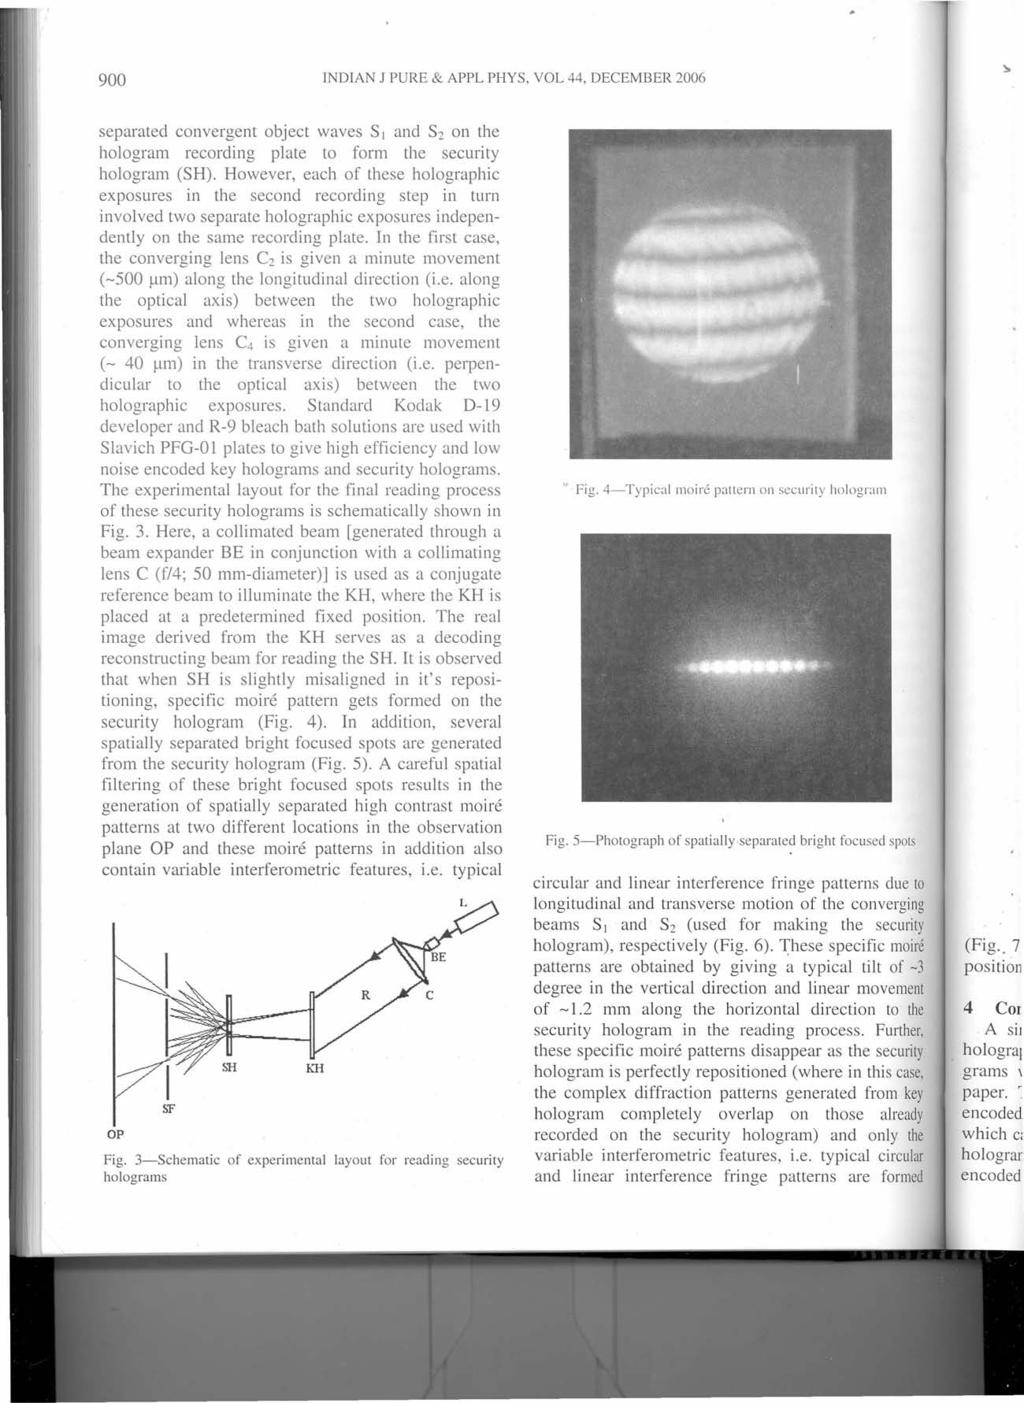 900 INDIAN J PURE & APPL PHYS, VOL 44, DECEMBER 2006 separated convergent object waves S I and S2 on the hologram recording plate to form the security hologram (SH).